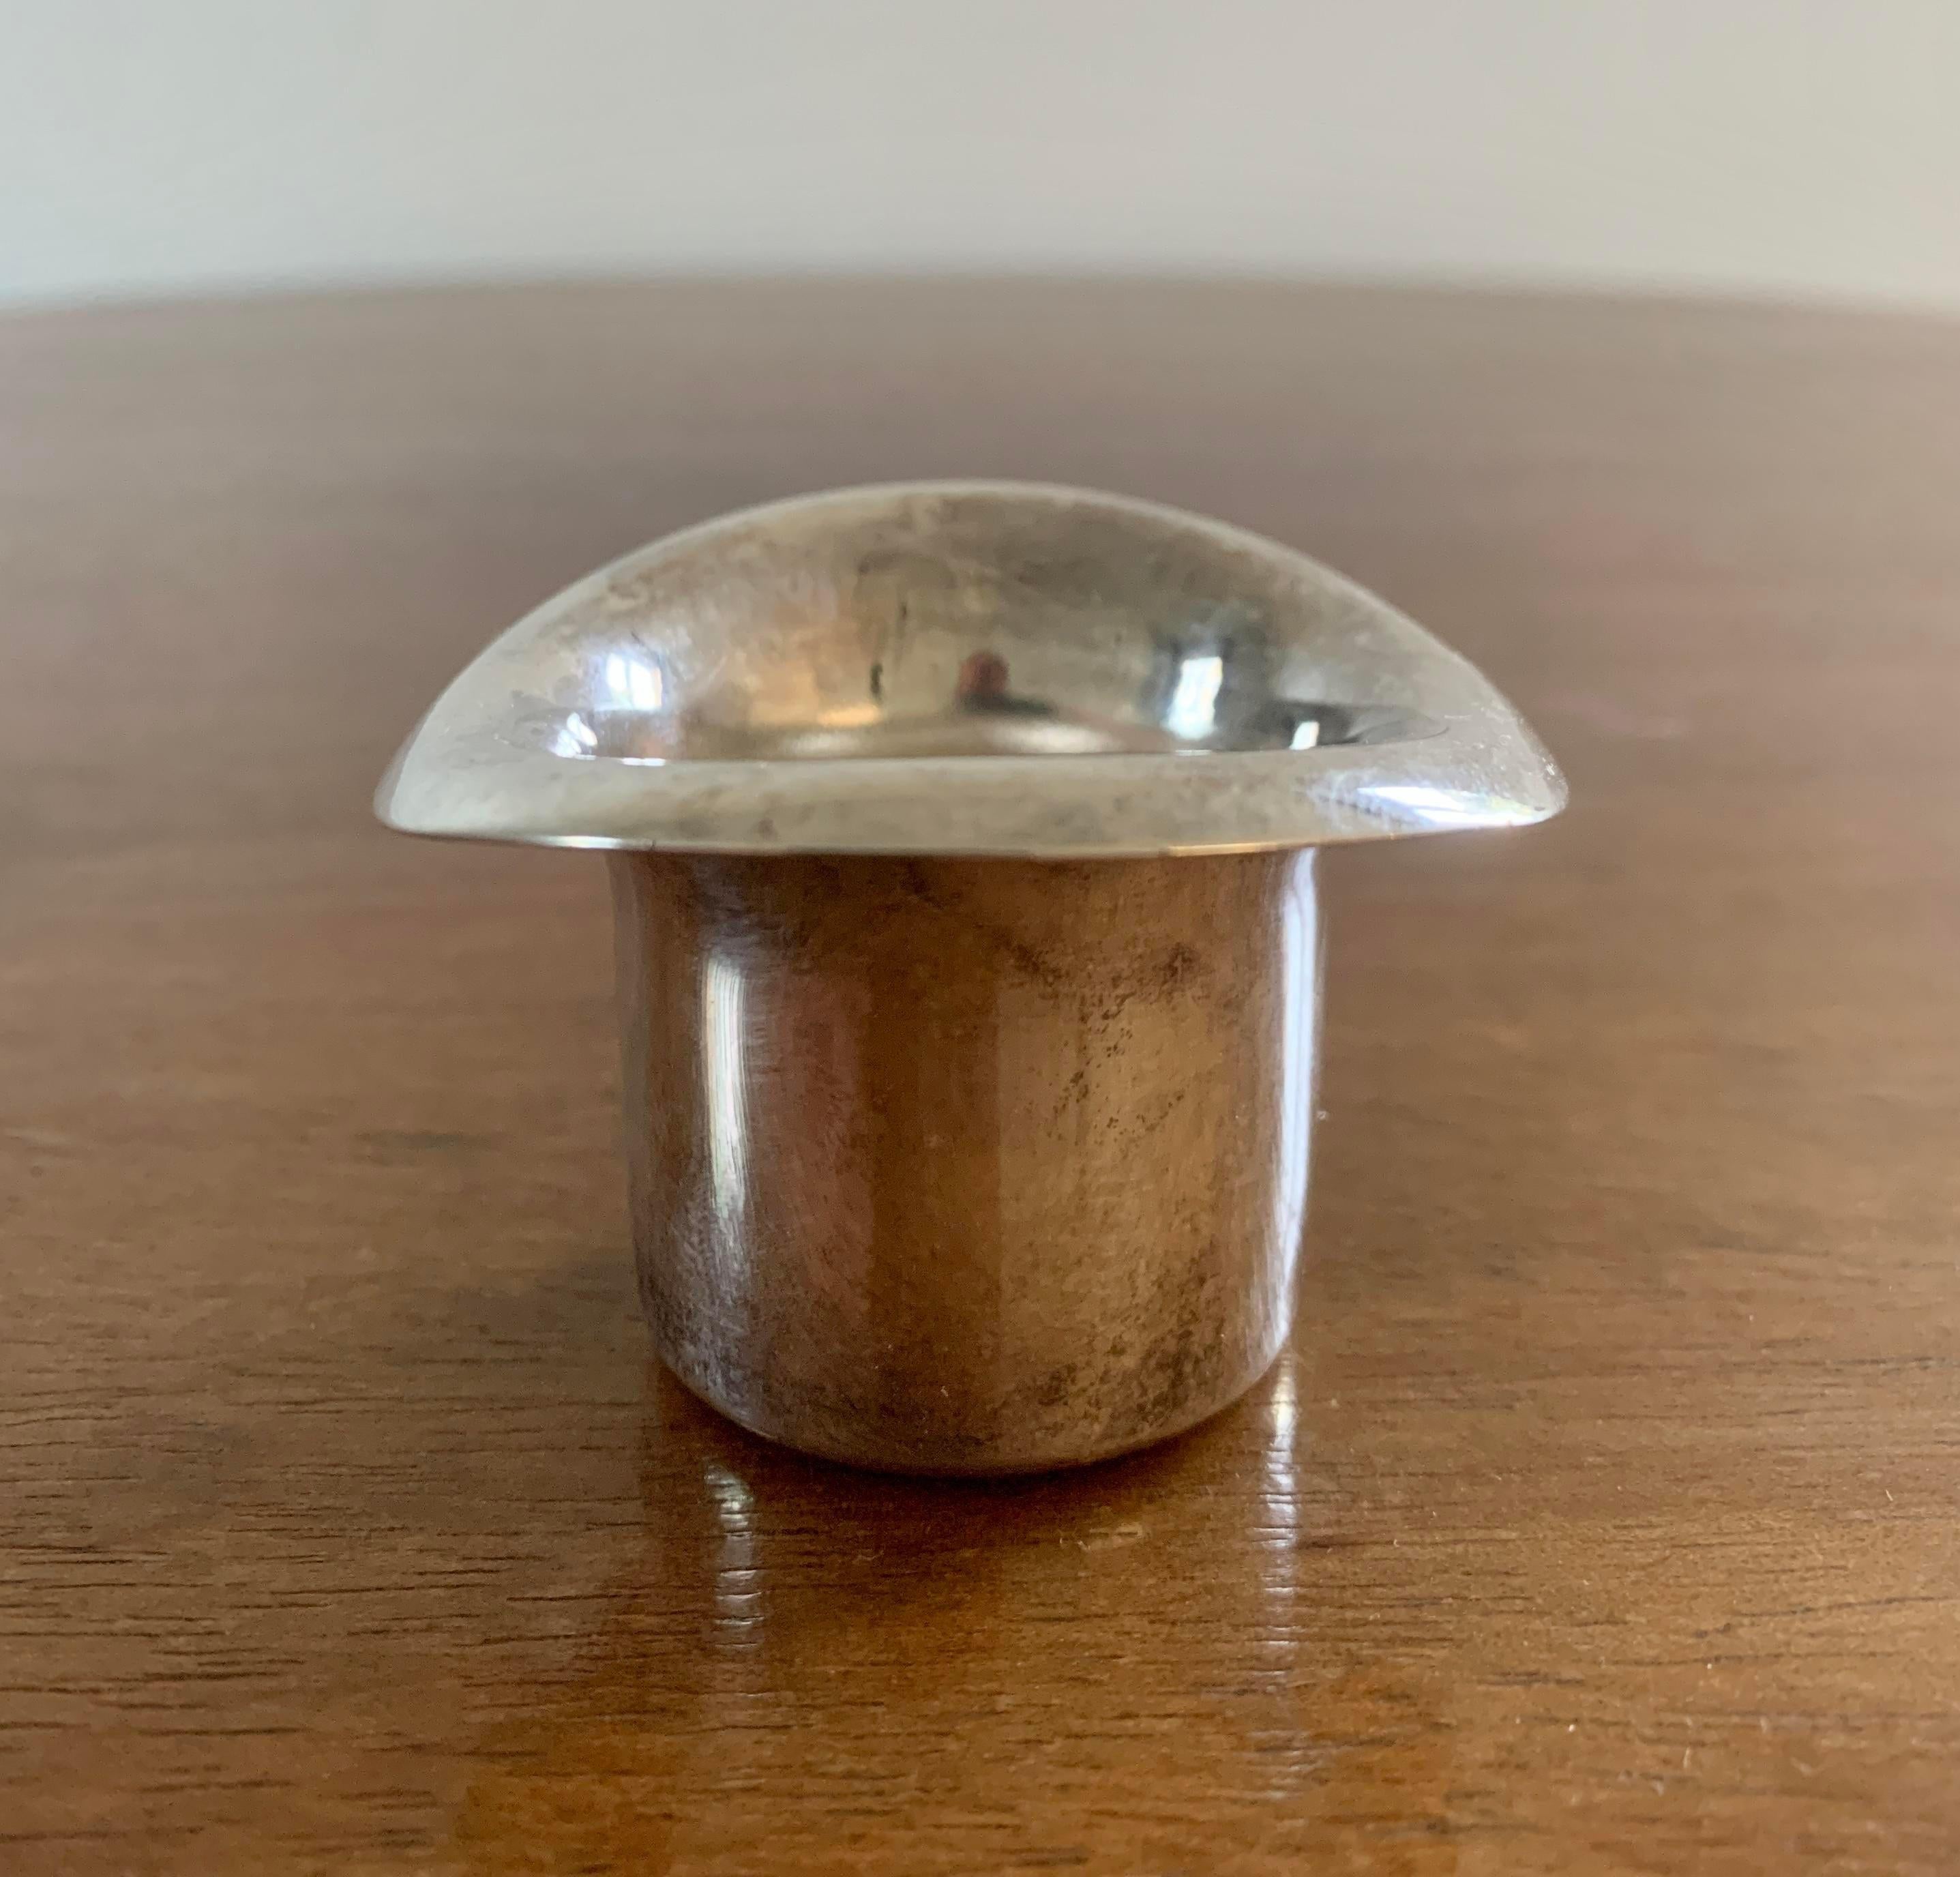 A charming silver cocktail pick or toothpick holder shaped as a top hat

Circa 1950s

Measures: 2.63